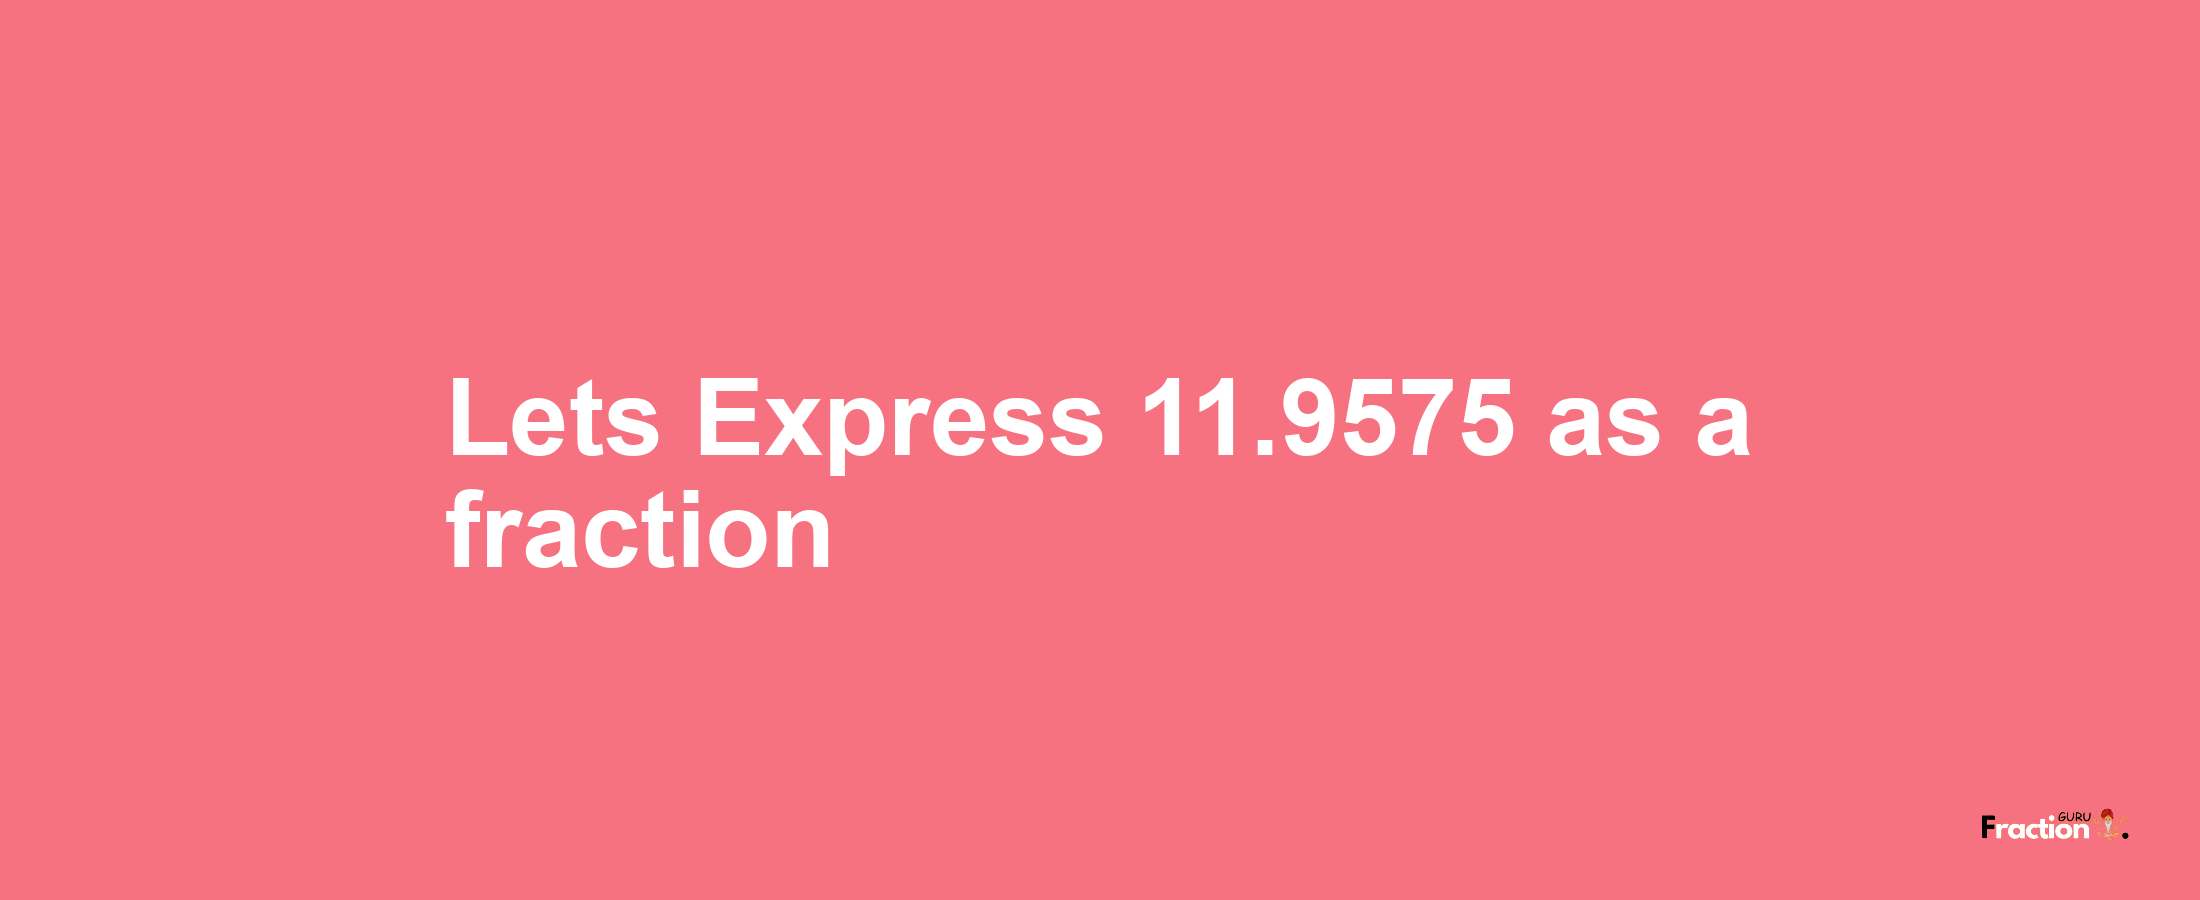 Lets Express 11.9575 as afraction